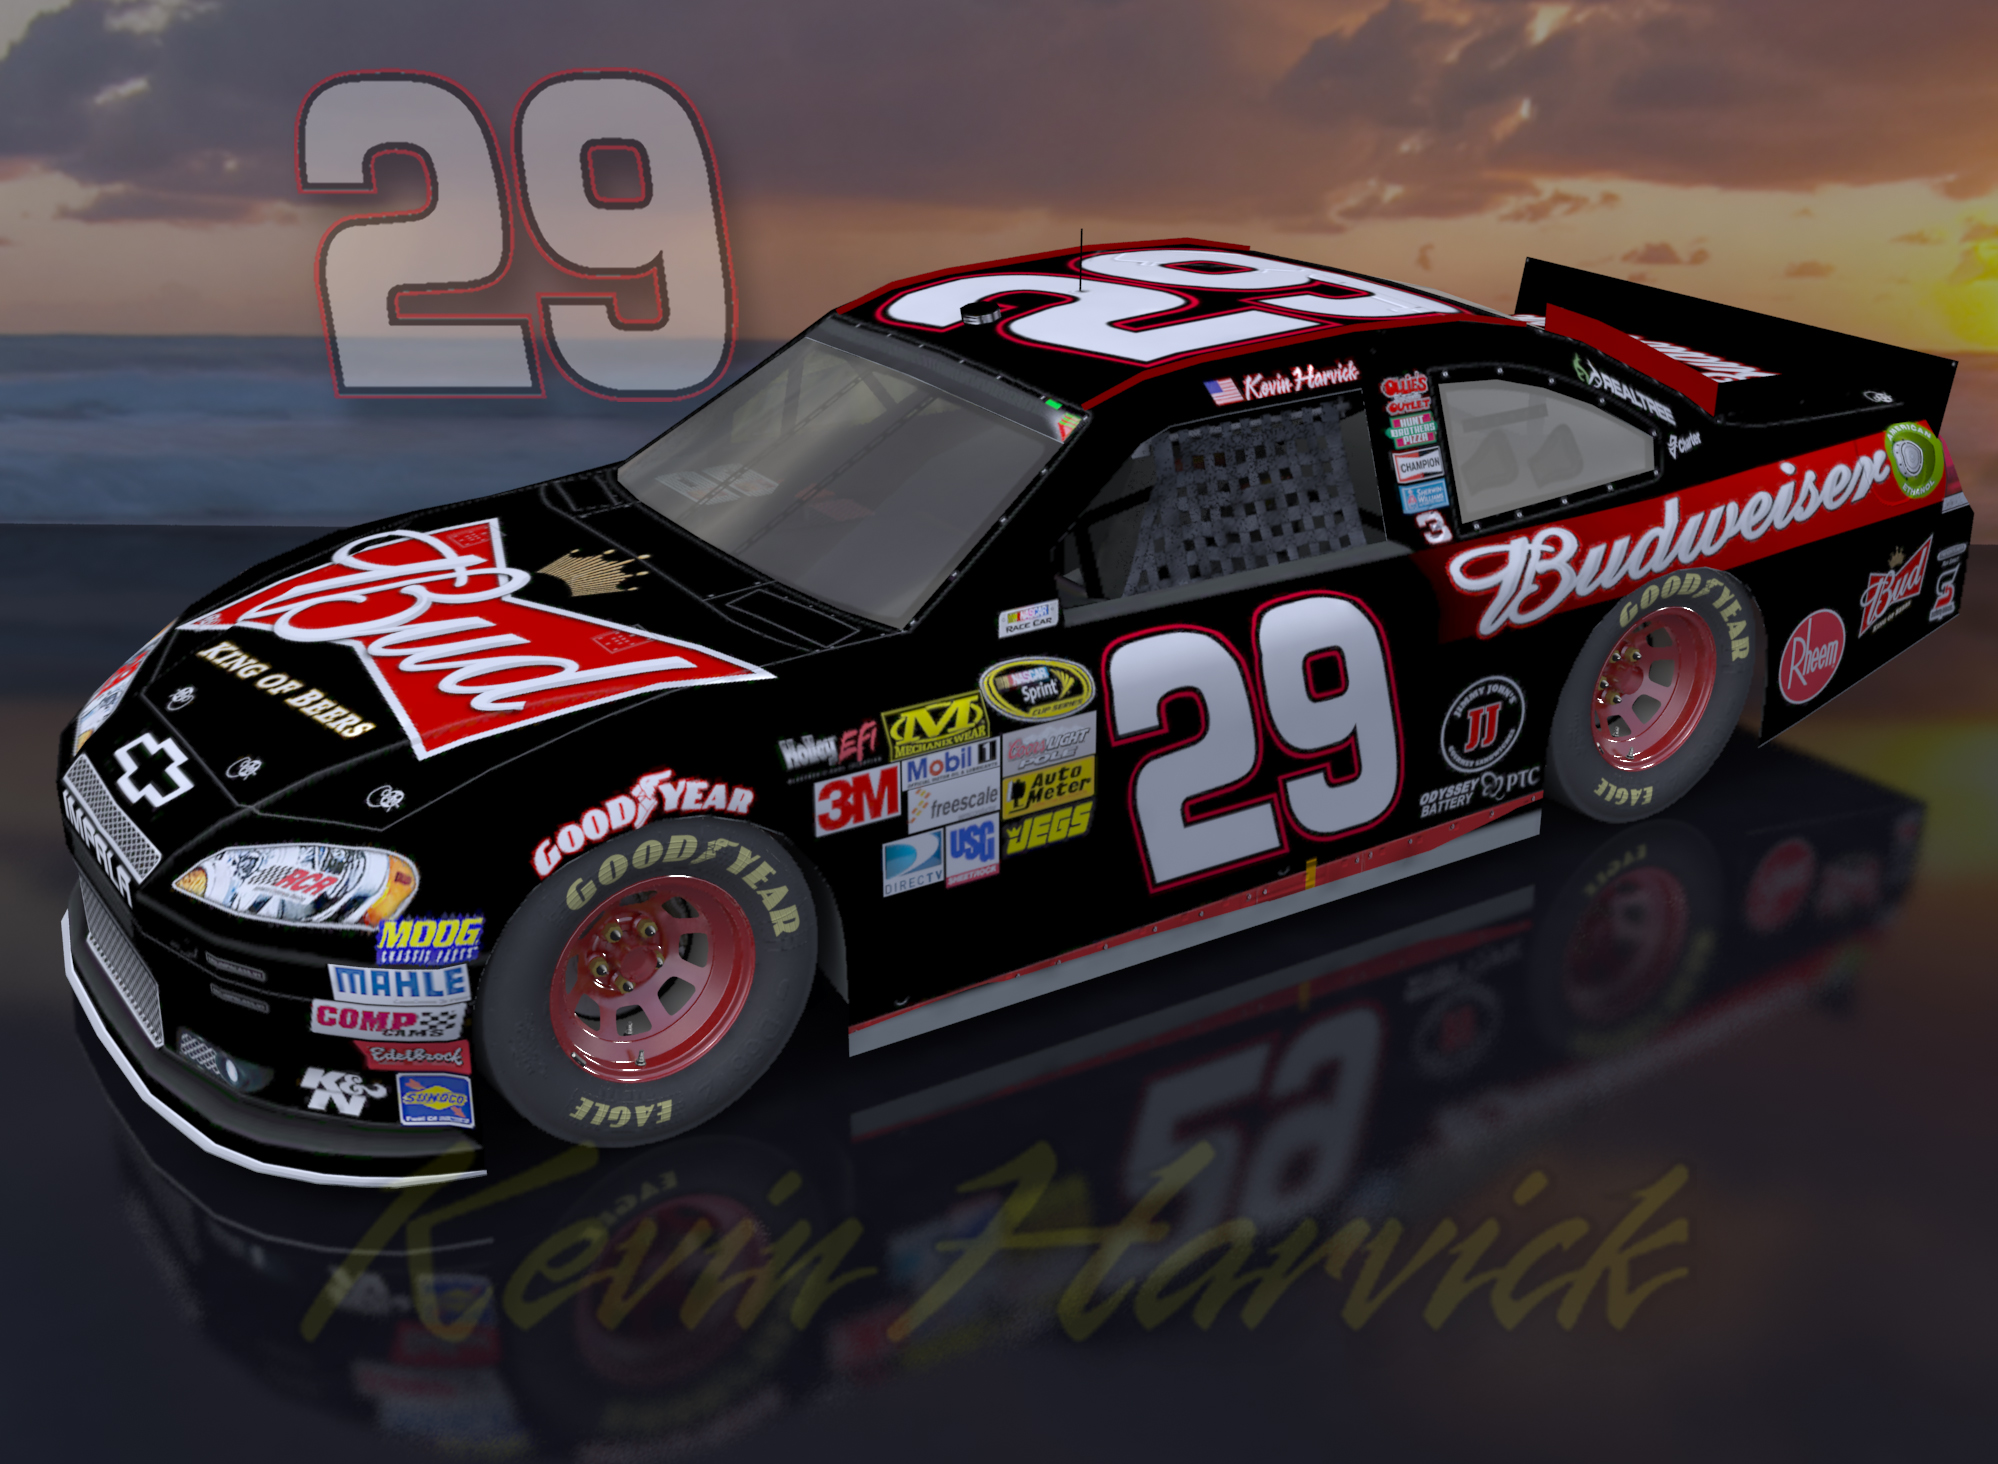 Wallpaper By Wicked Shadows Kevin Harvick Budweiser Sunset Outdoors